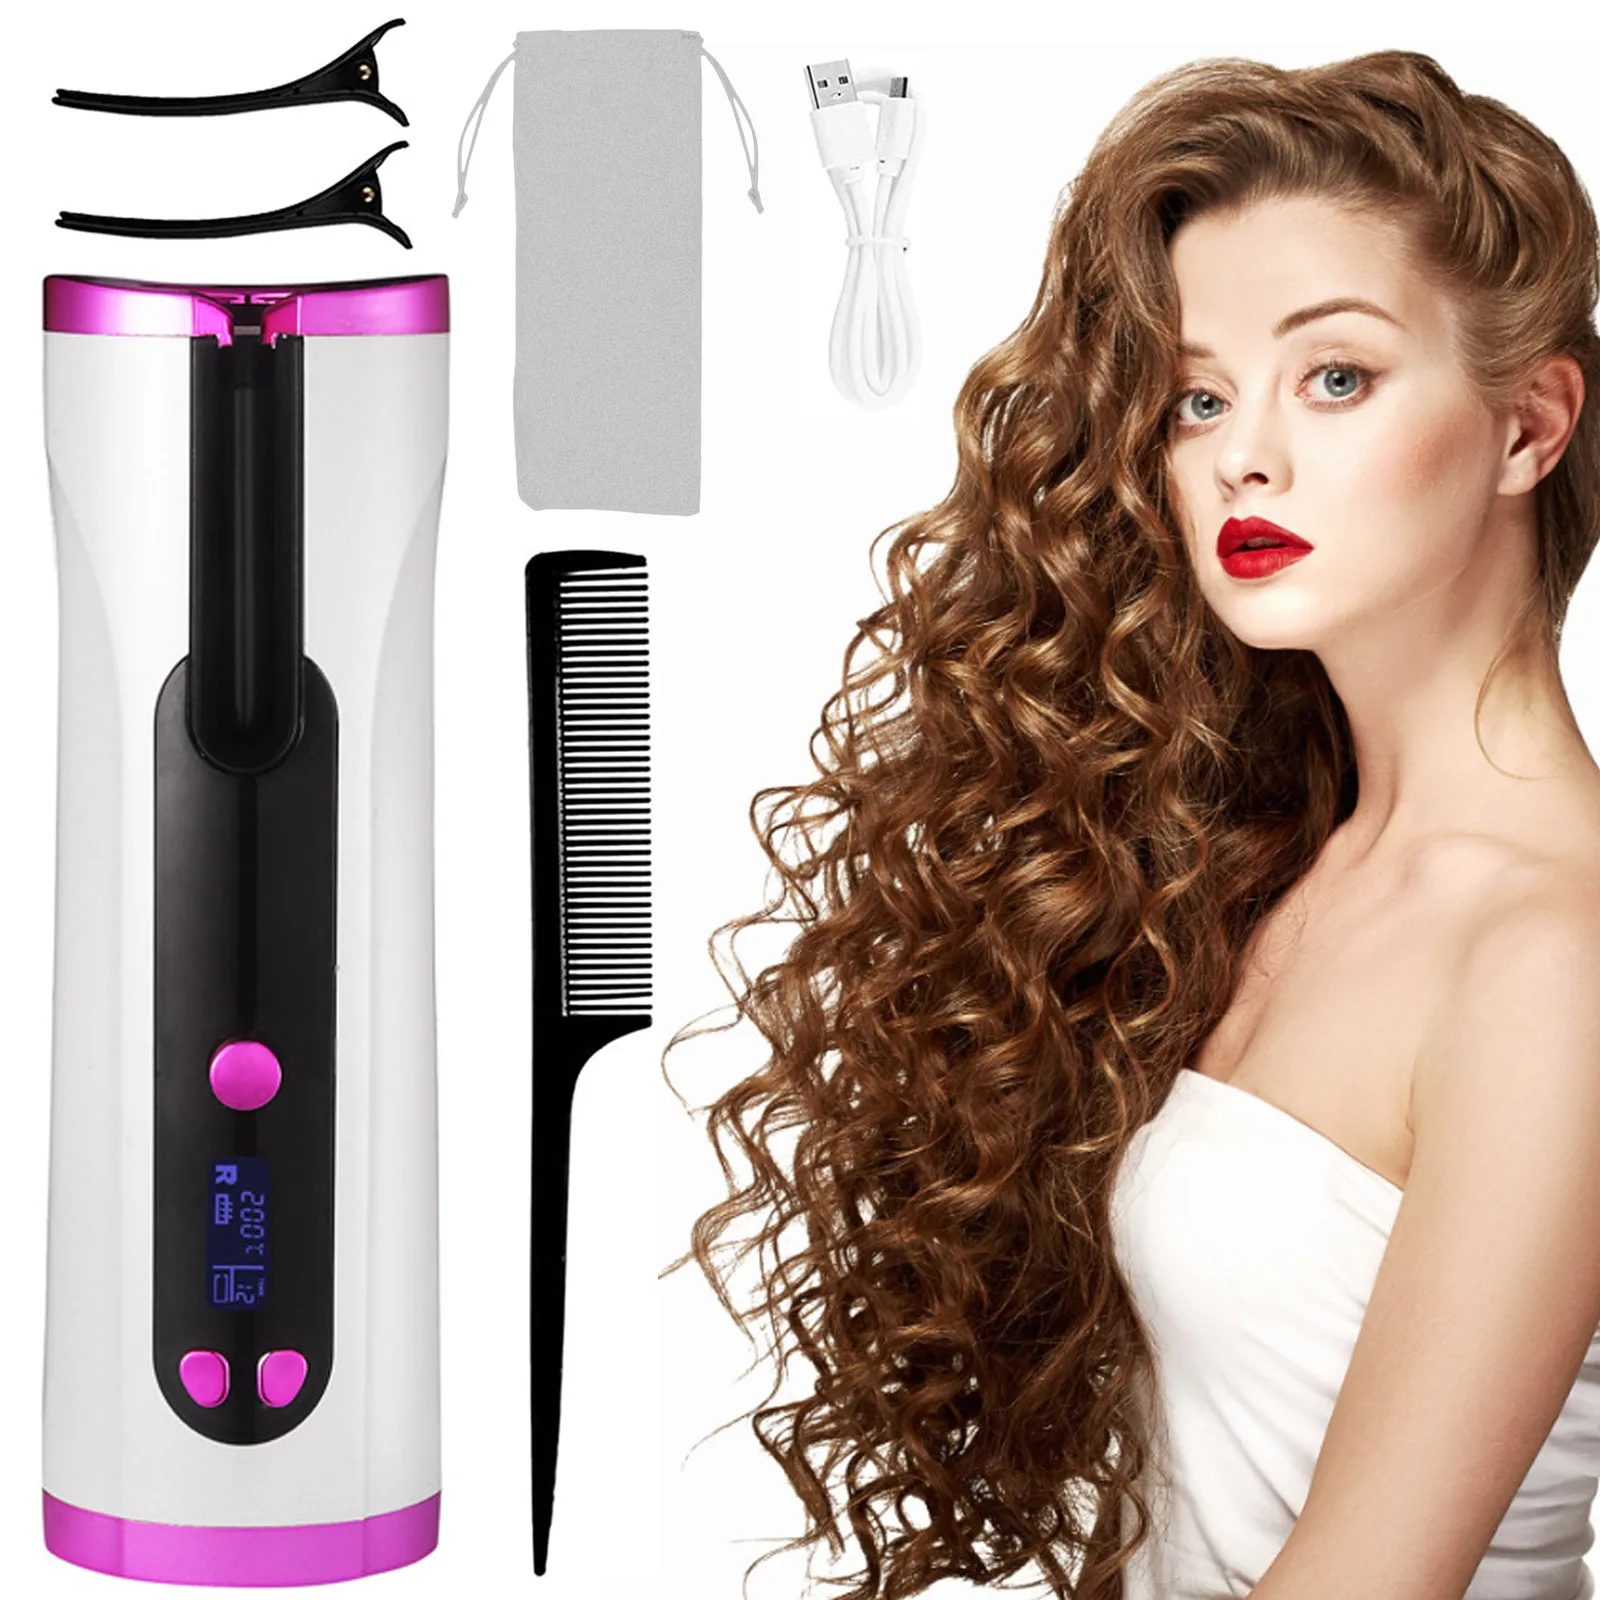 Portable Automatic Curling Iron Wireless Rechargeable Hair Curler Roller Quick Heating Smart Power Off for Wet Dry Hair v380 pro bulb surveillance camera 2 4g wifi e27 wireless security monitor cam night vision full color automatic human tracking